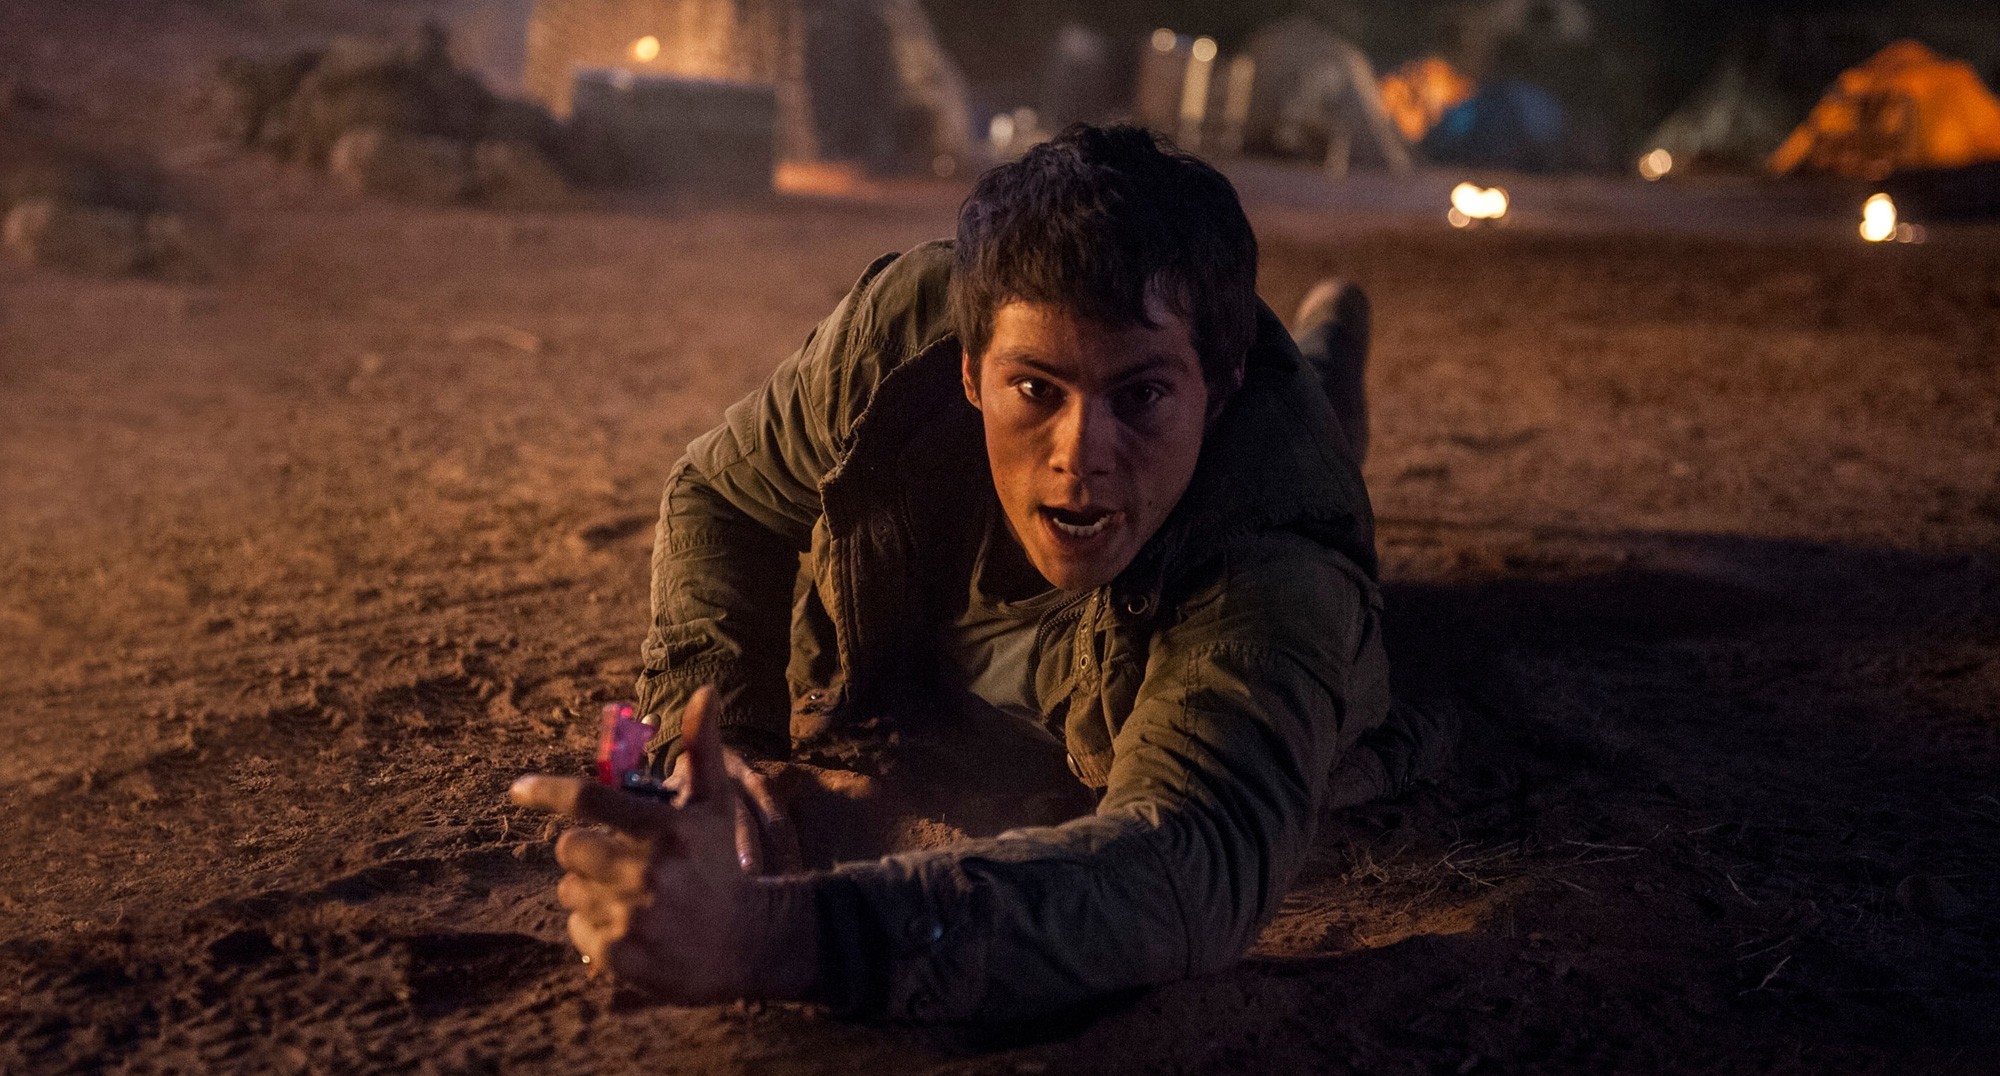 scorchtrials-6-gallery-image.jpg